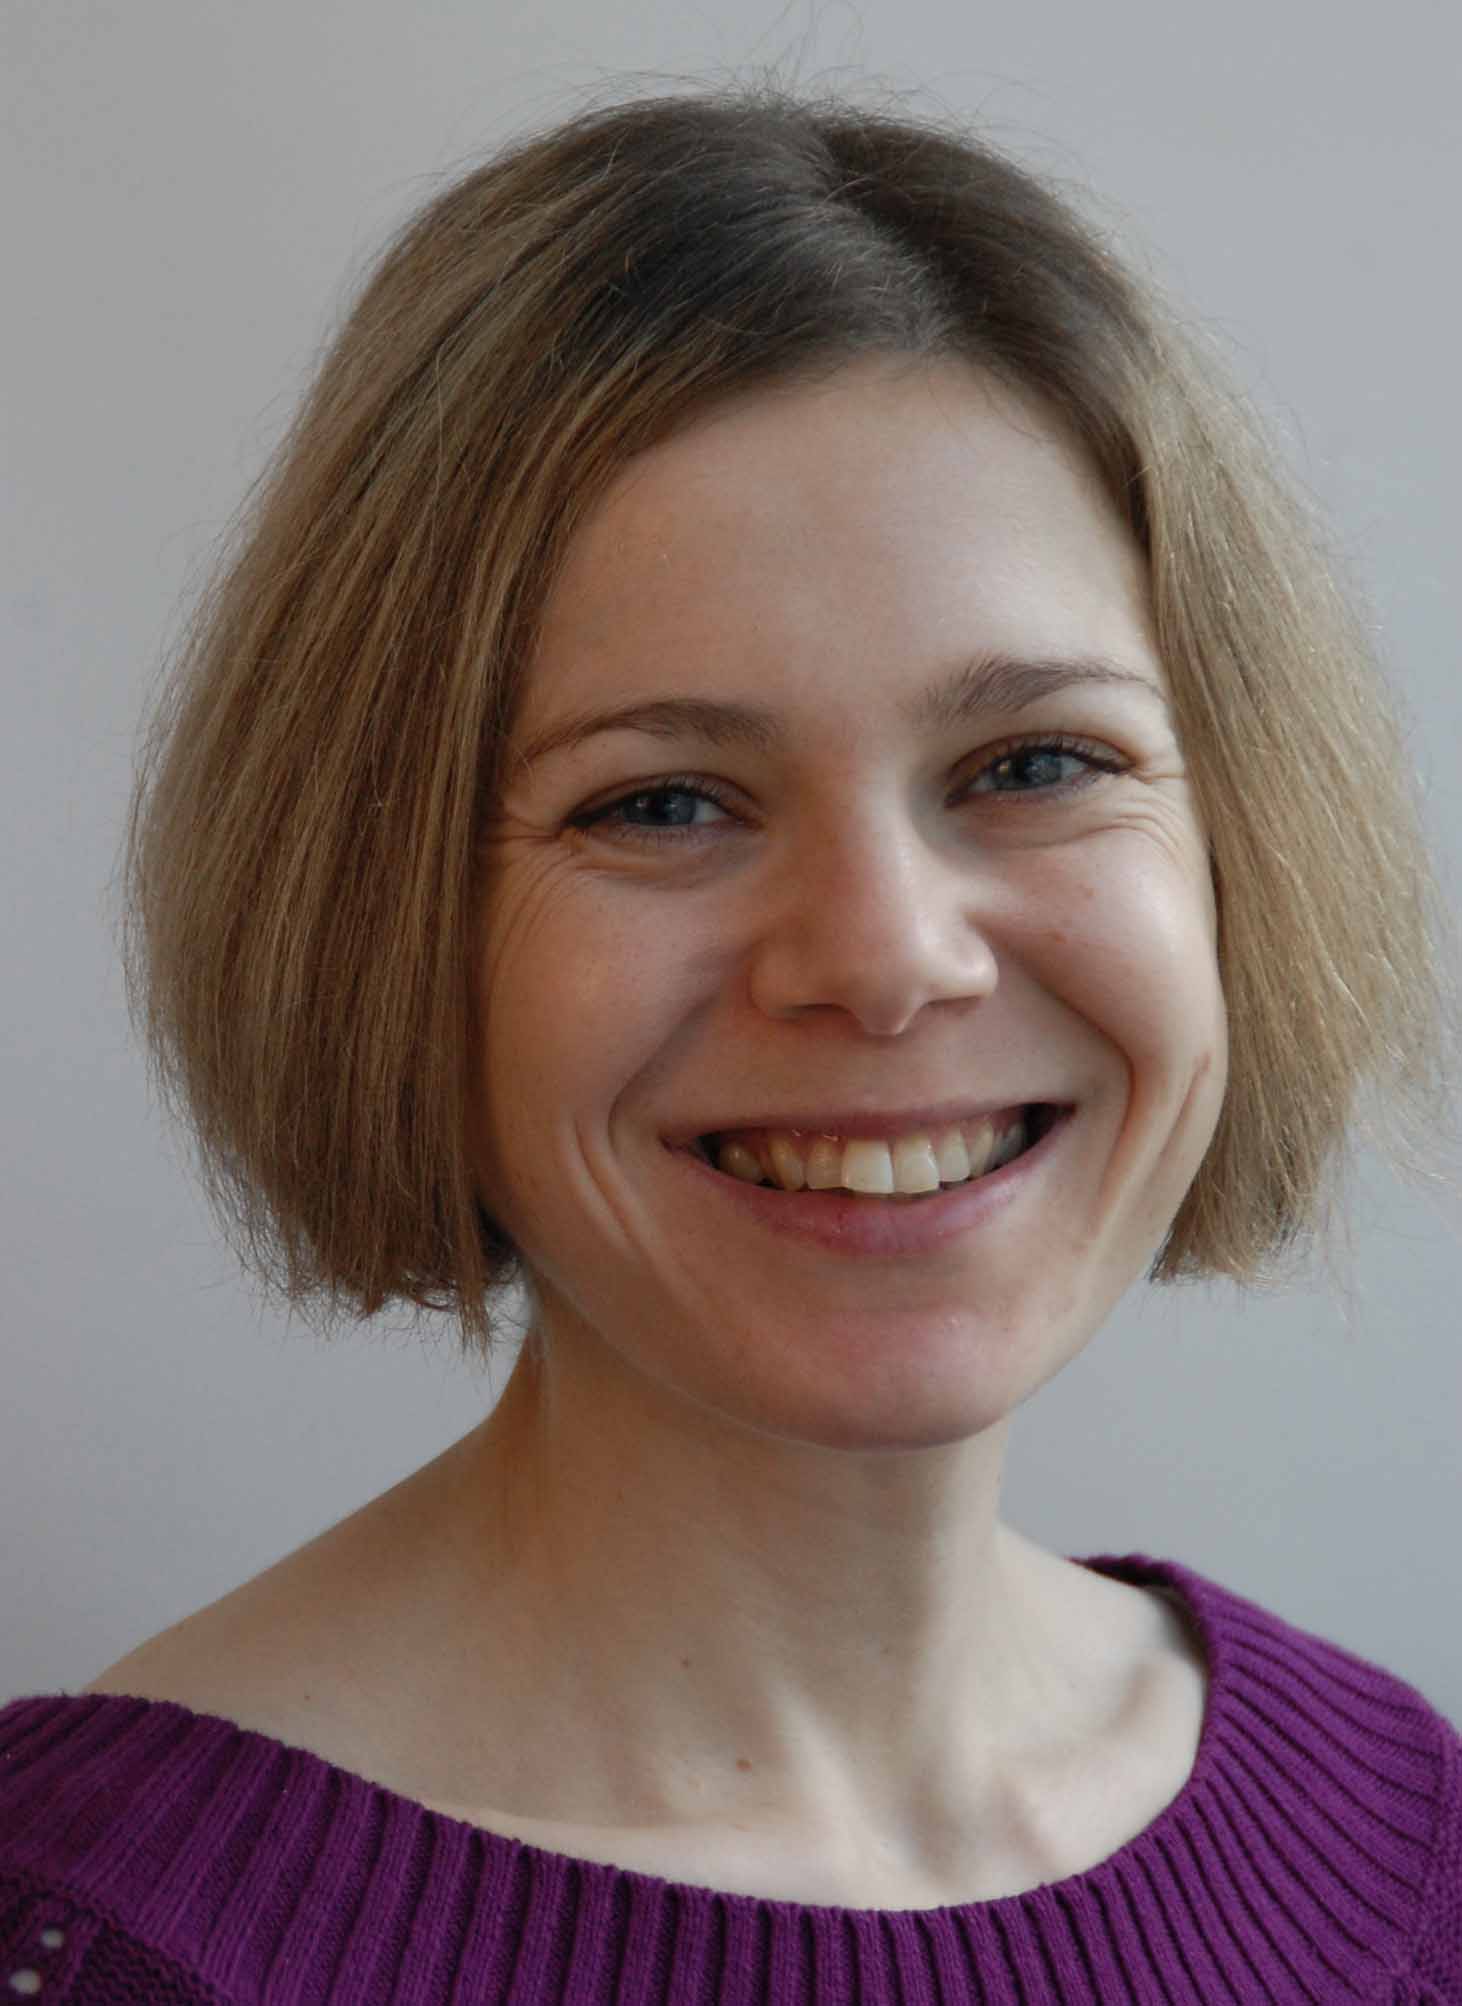 Dr Caroline Knight's research interests includes work design, remote and hybrid work, word redesign interventions and wellbeing.